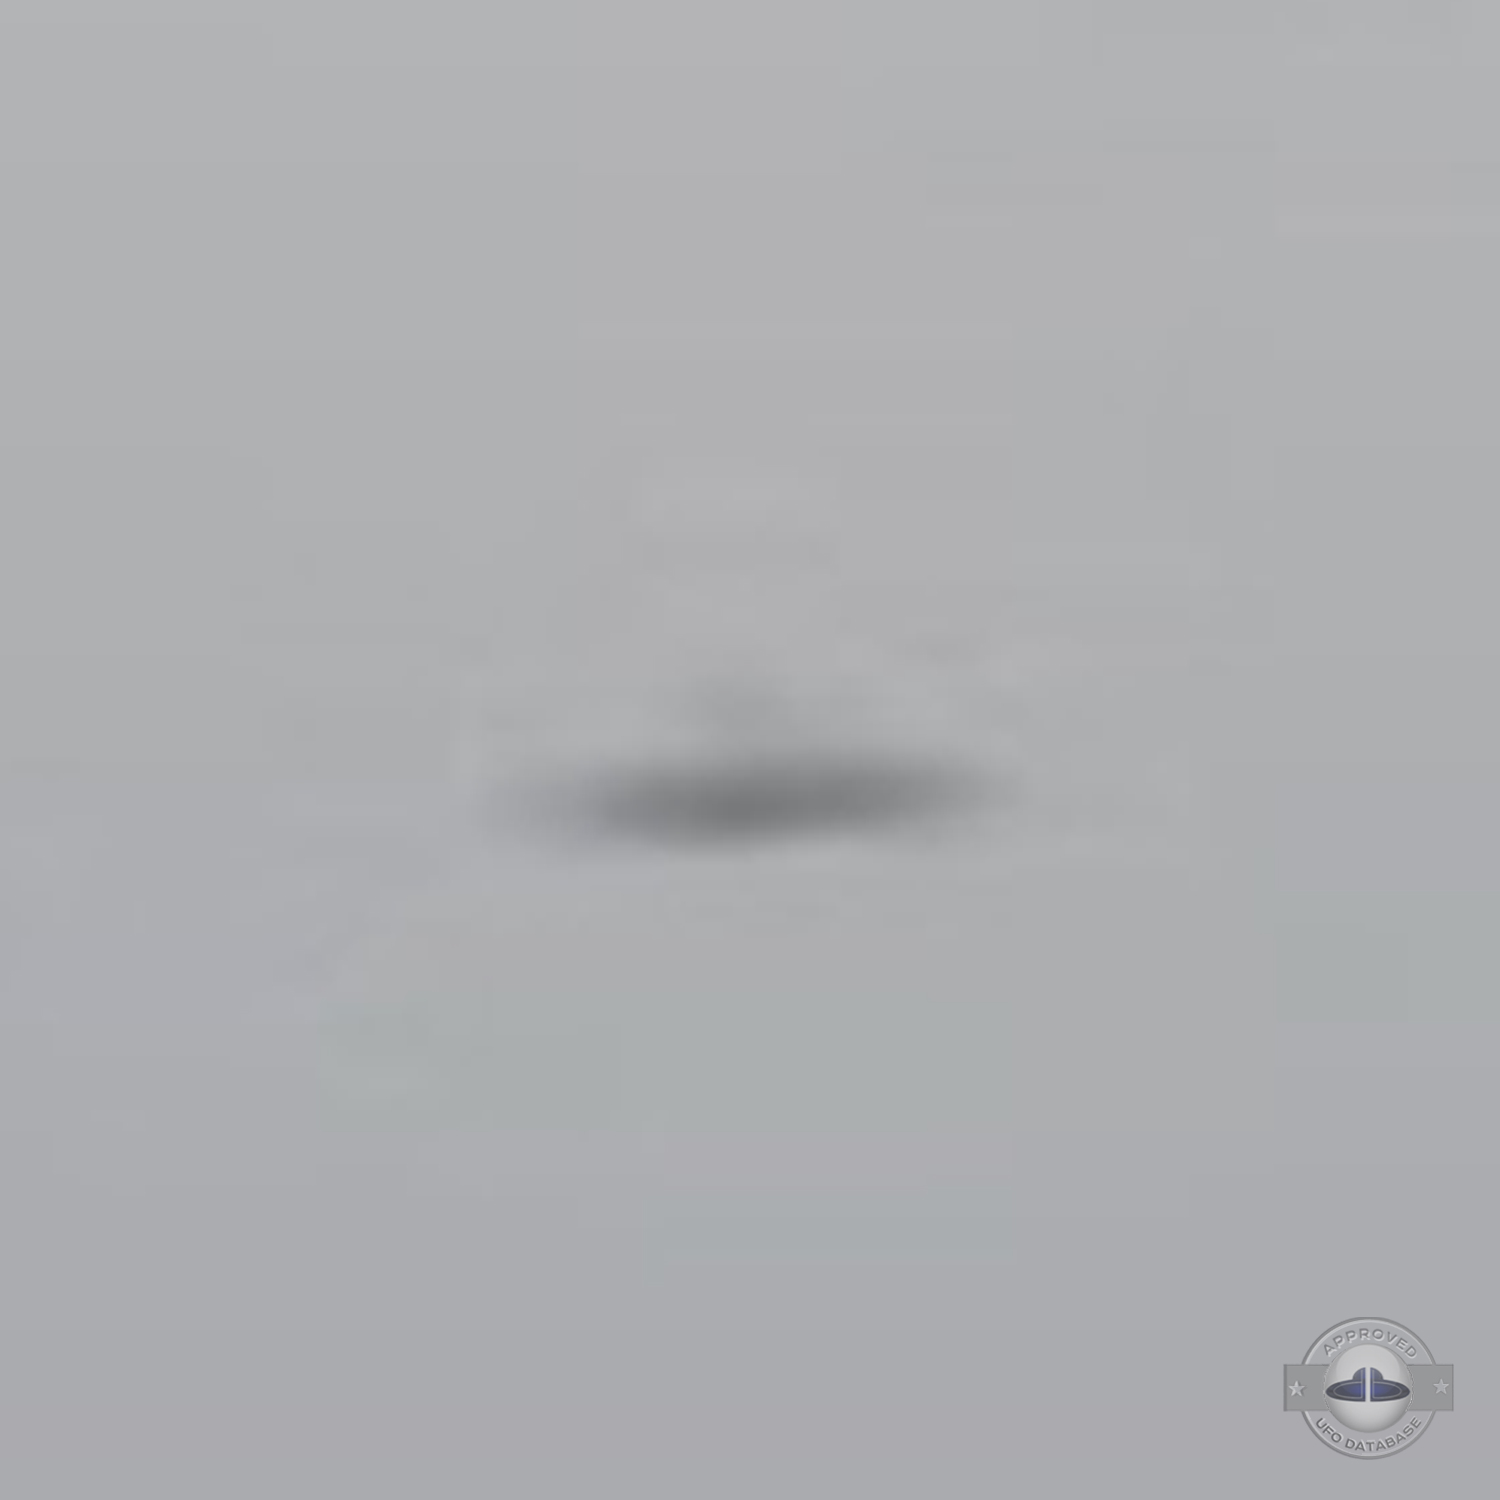 Ise Shima National Park UFO picture | Kansai, Japan | July 12 2009 UFO Picture #236-3